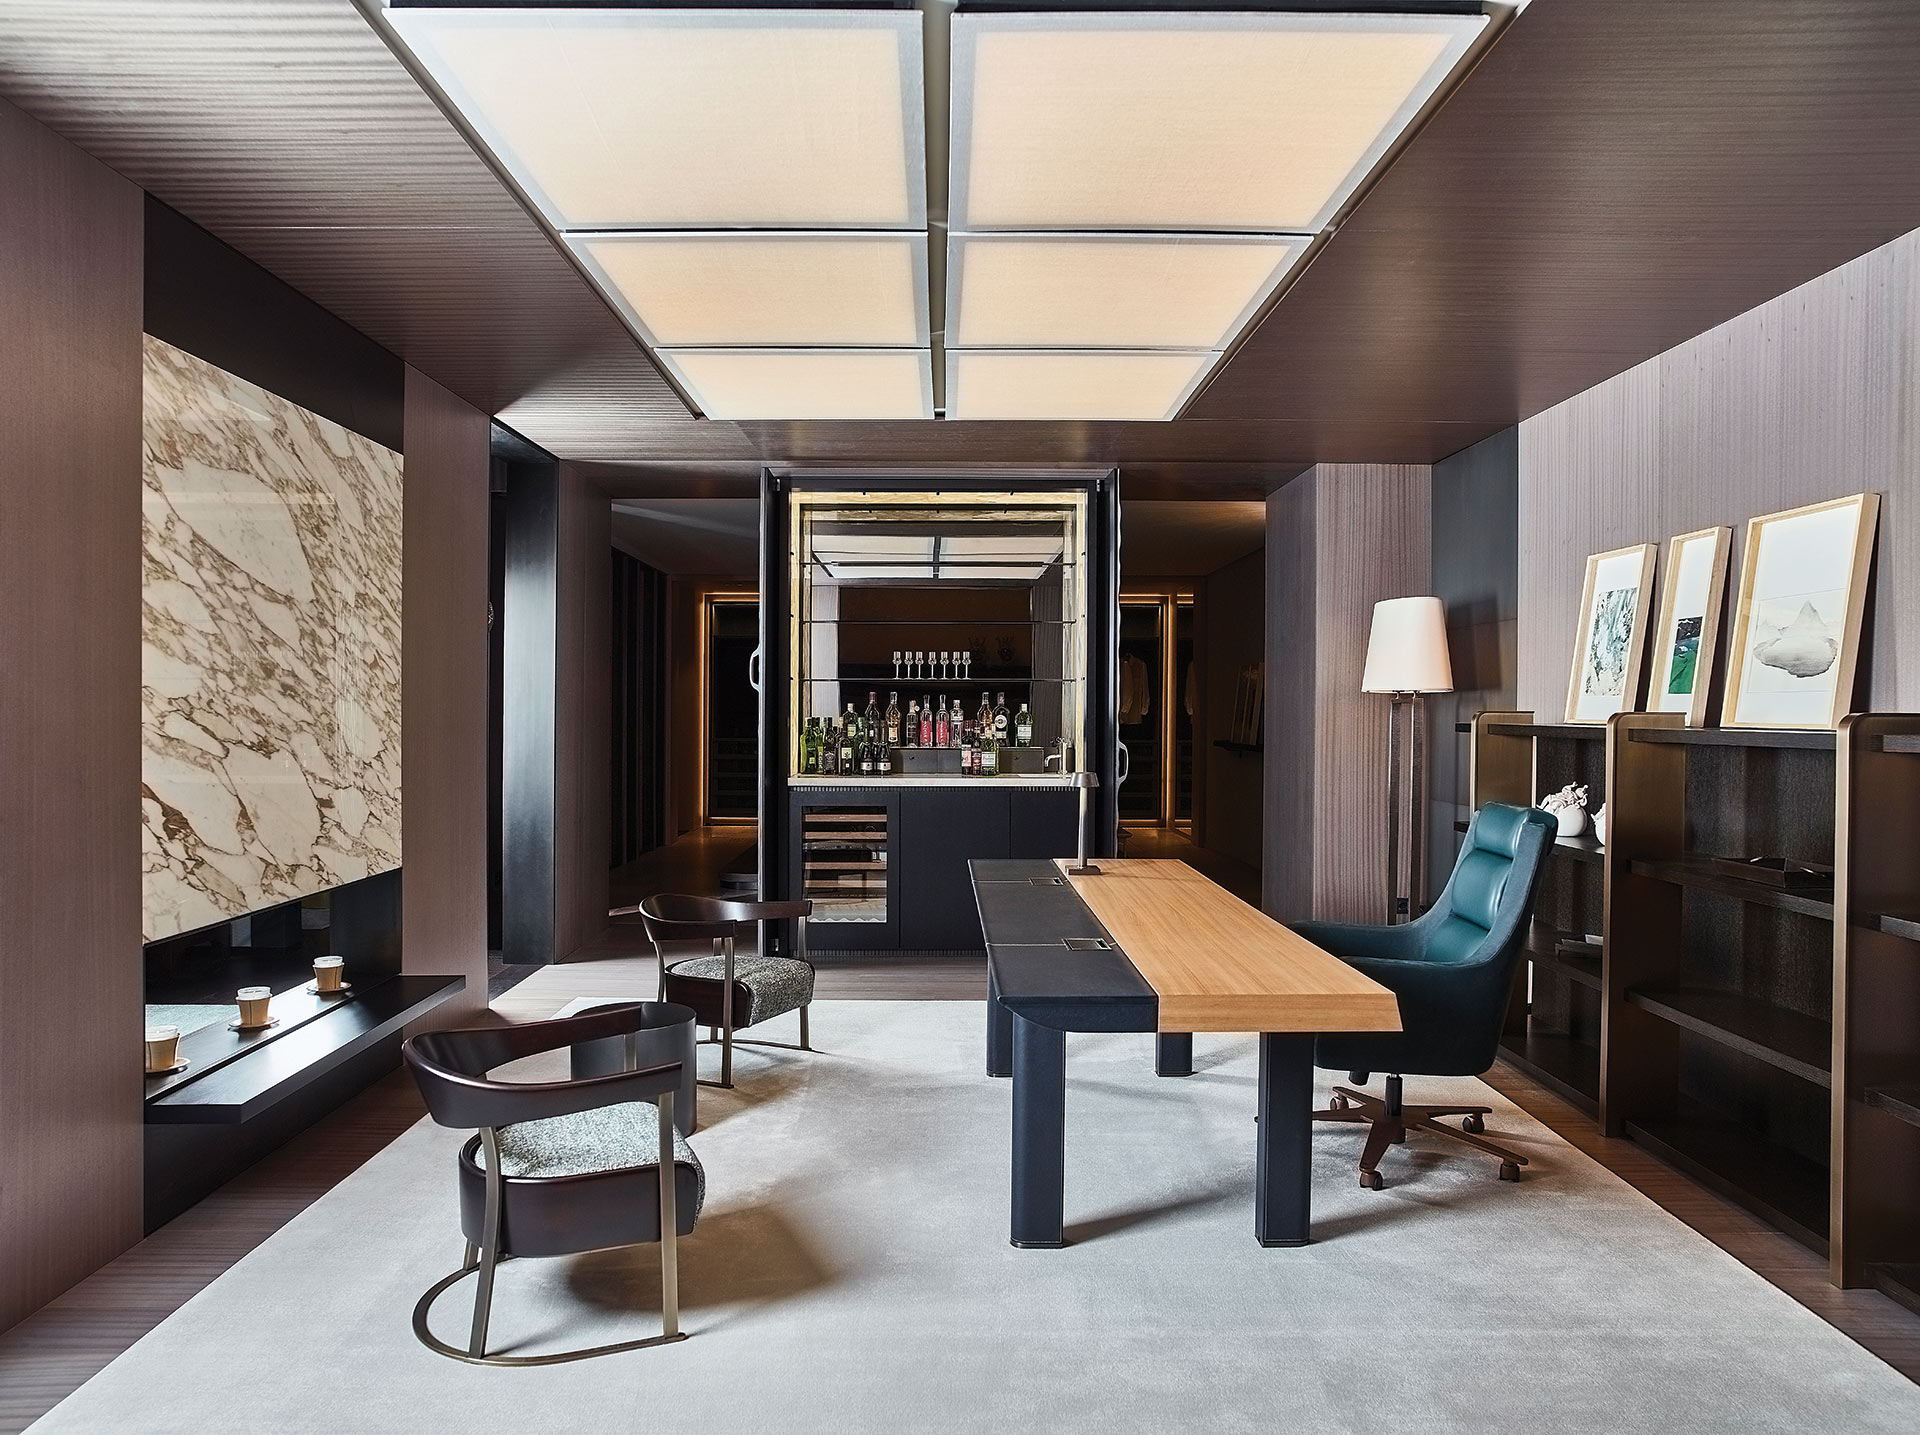 The concept of "home" is the perfect synthesis of this celebration: a place where new products coexist with the most beloved ones, and where Promemoria experience goes beyond the boundaries of custom-made furniture and conceives design at 360°.